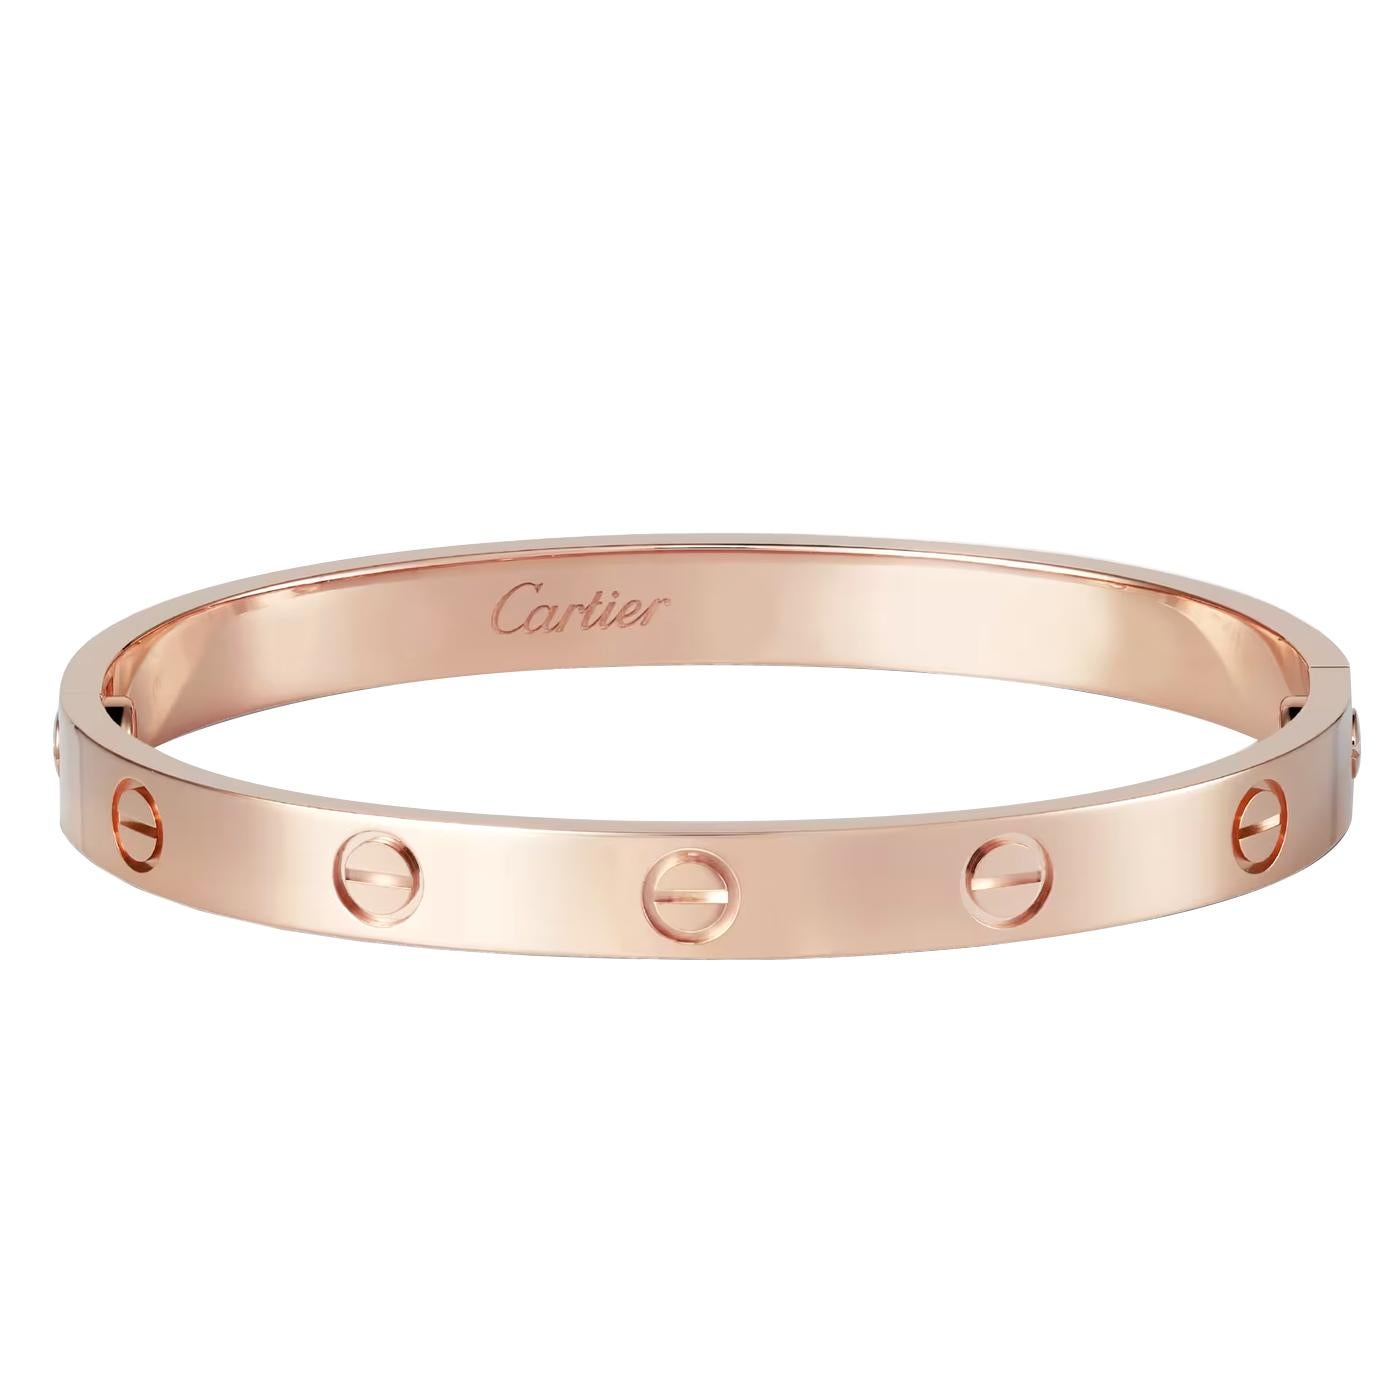 LOVE bracelet, 18K rose gold (750/1000). Comes with a screwdriver. Width: 6.1 mm. Created in New York in 1969, the LOVE bracelet is an icon of jewelry design: a close fitting, oval bracelet composed of two rigid arcs which is worn on the wrist and